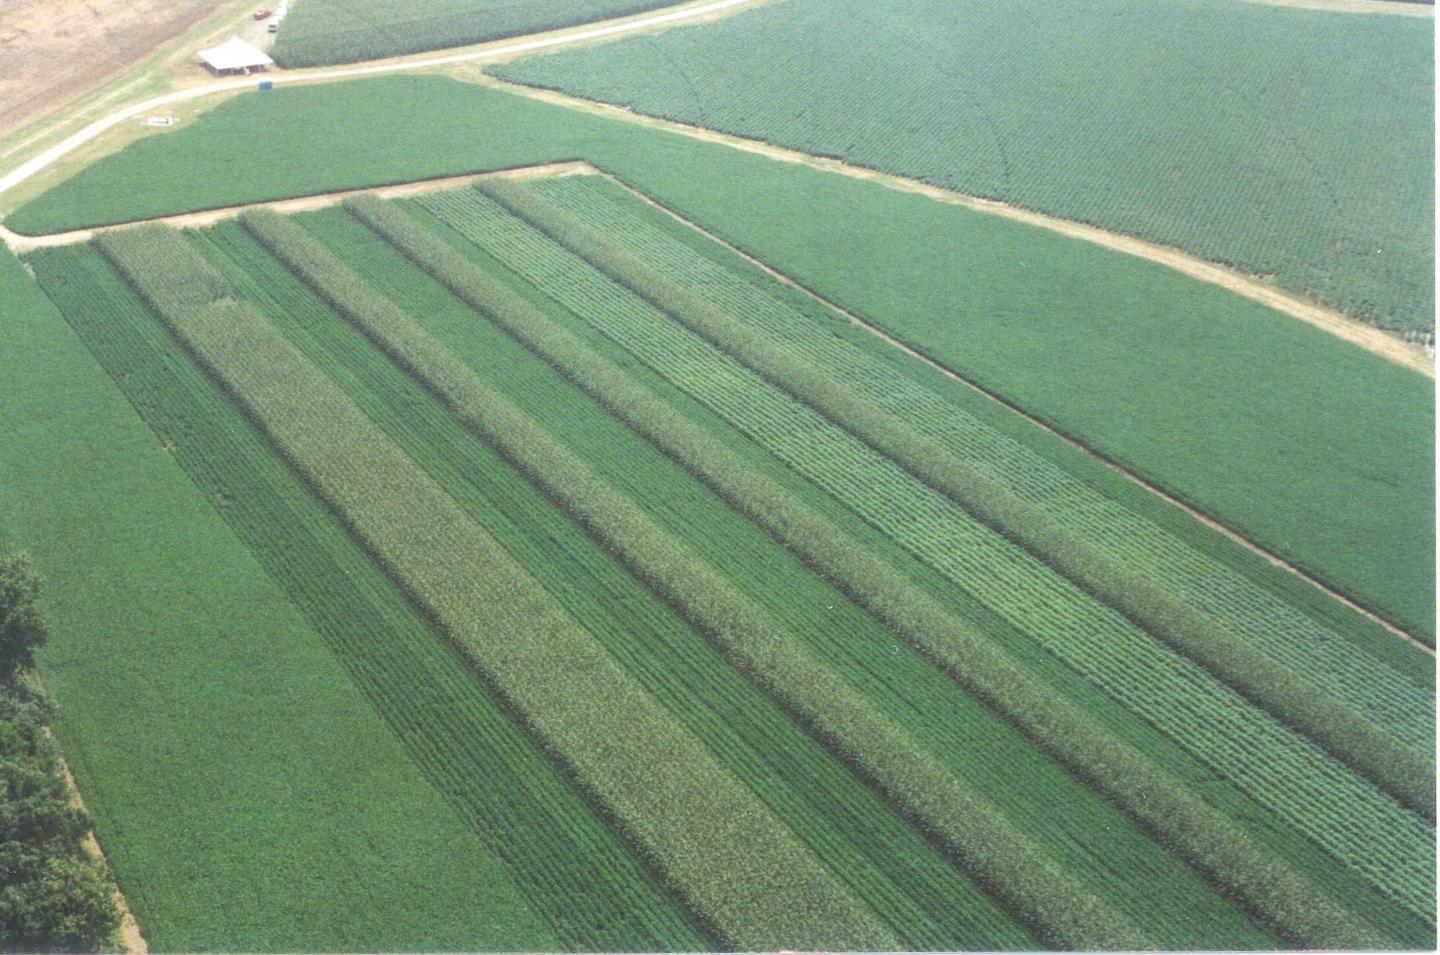 Aerial photo of Agronomic Systems Study in Milan, Tenn.